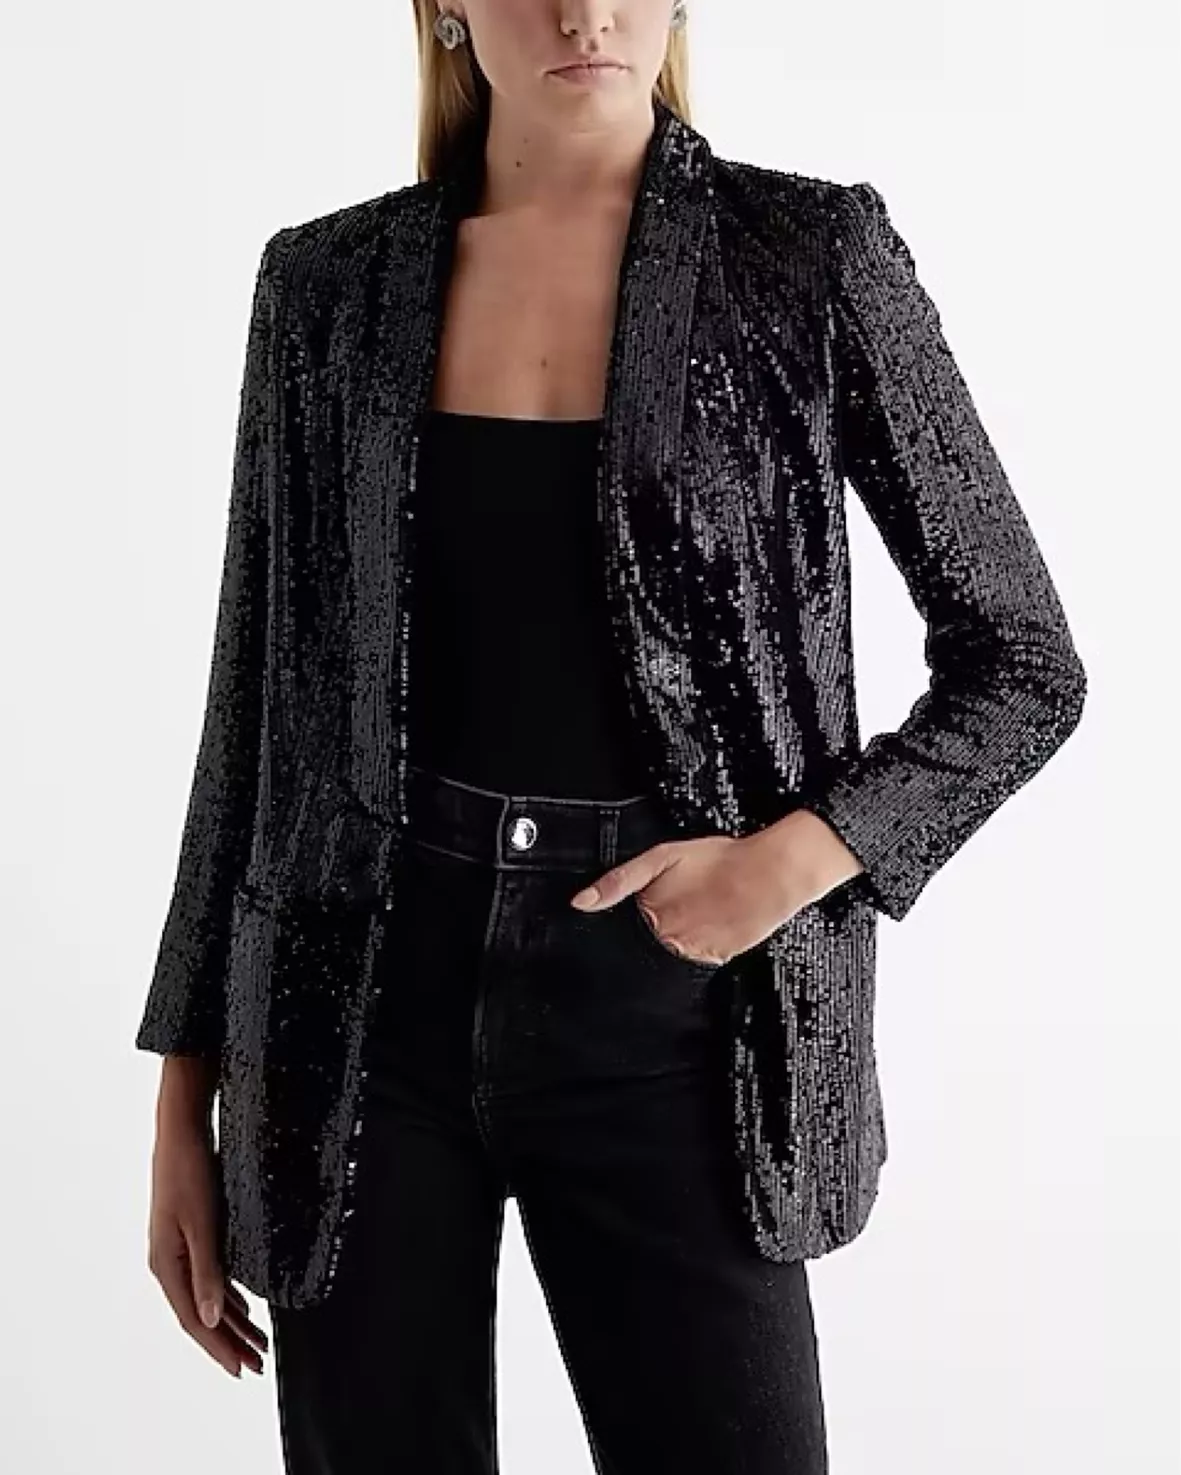 Drape Front Jacket curated on LTK